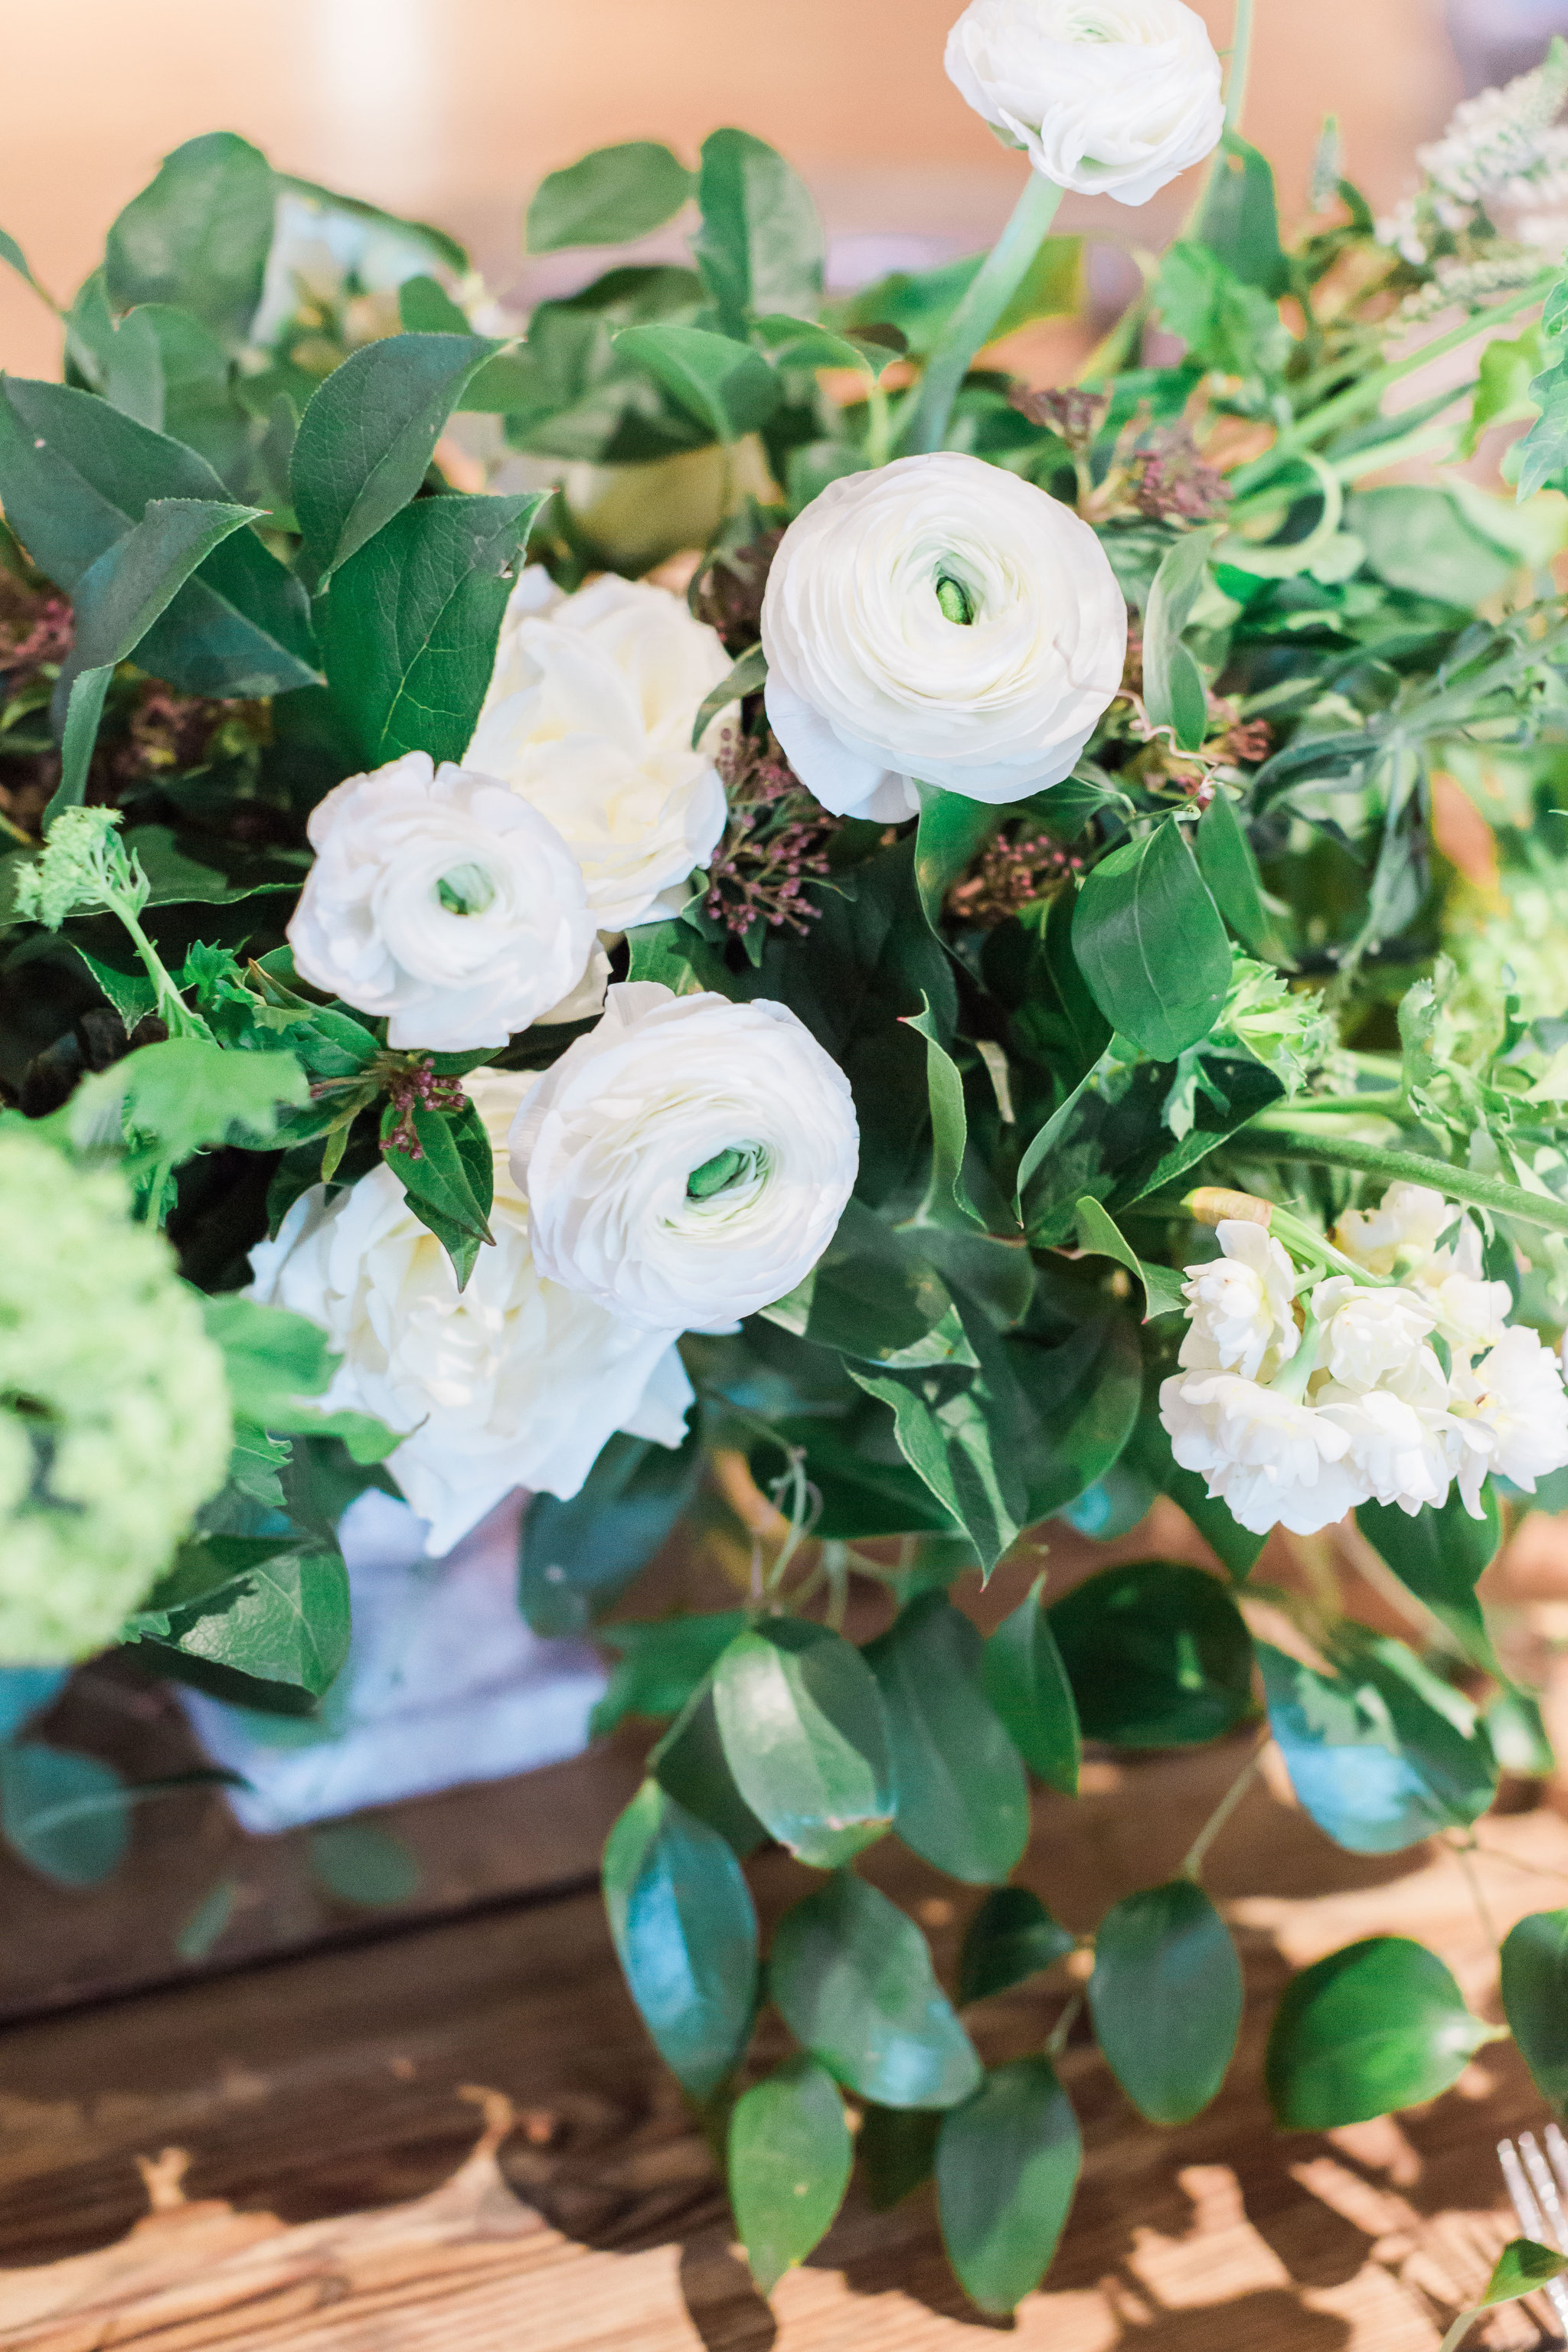 Winter wedding centerpiece with Clooney ranunculus, Southern smilax, and snowball viburnum.